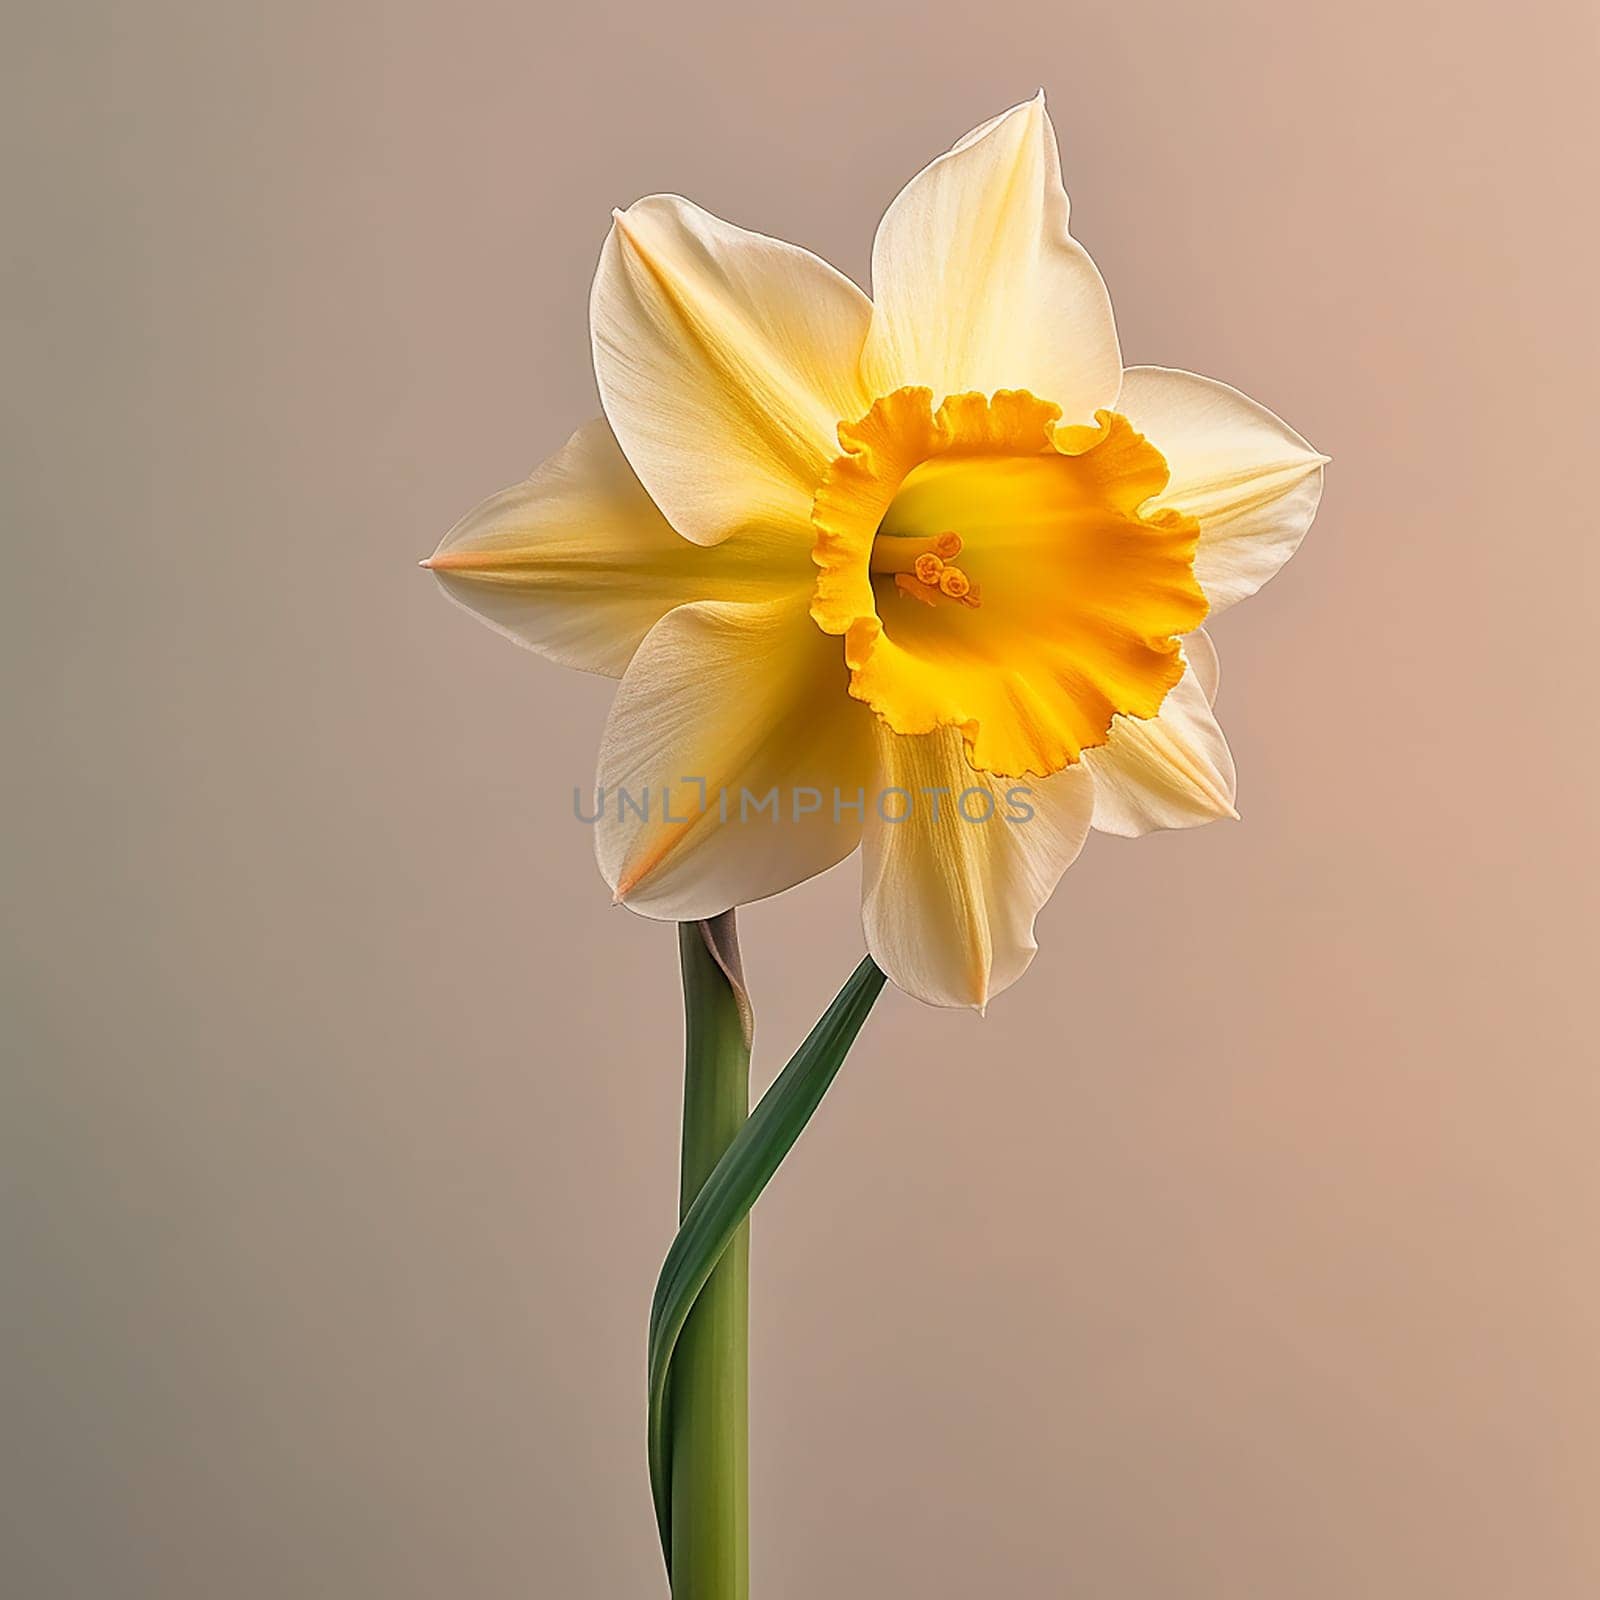 Beautiful daffodil with a vibrant yellow corona and pale petals.